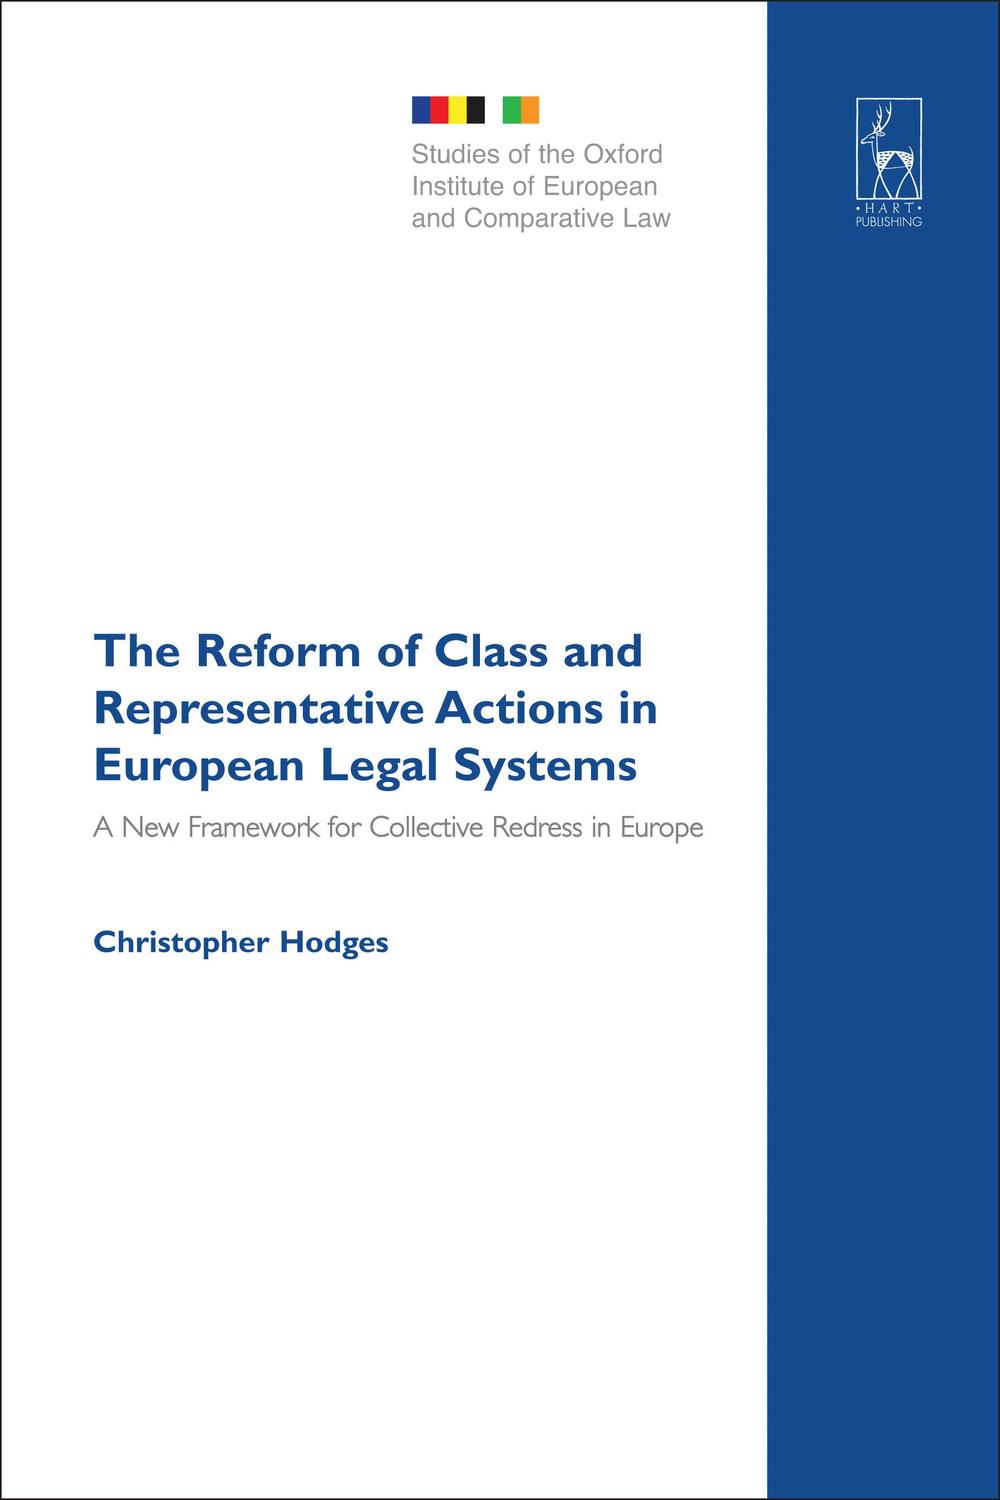 The Reform of Class and Representative Actions in European Legal Systems - Christopher Hodges